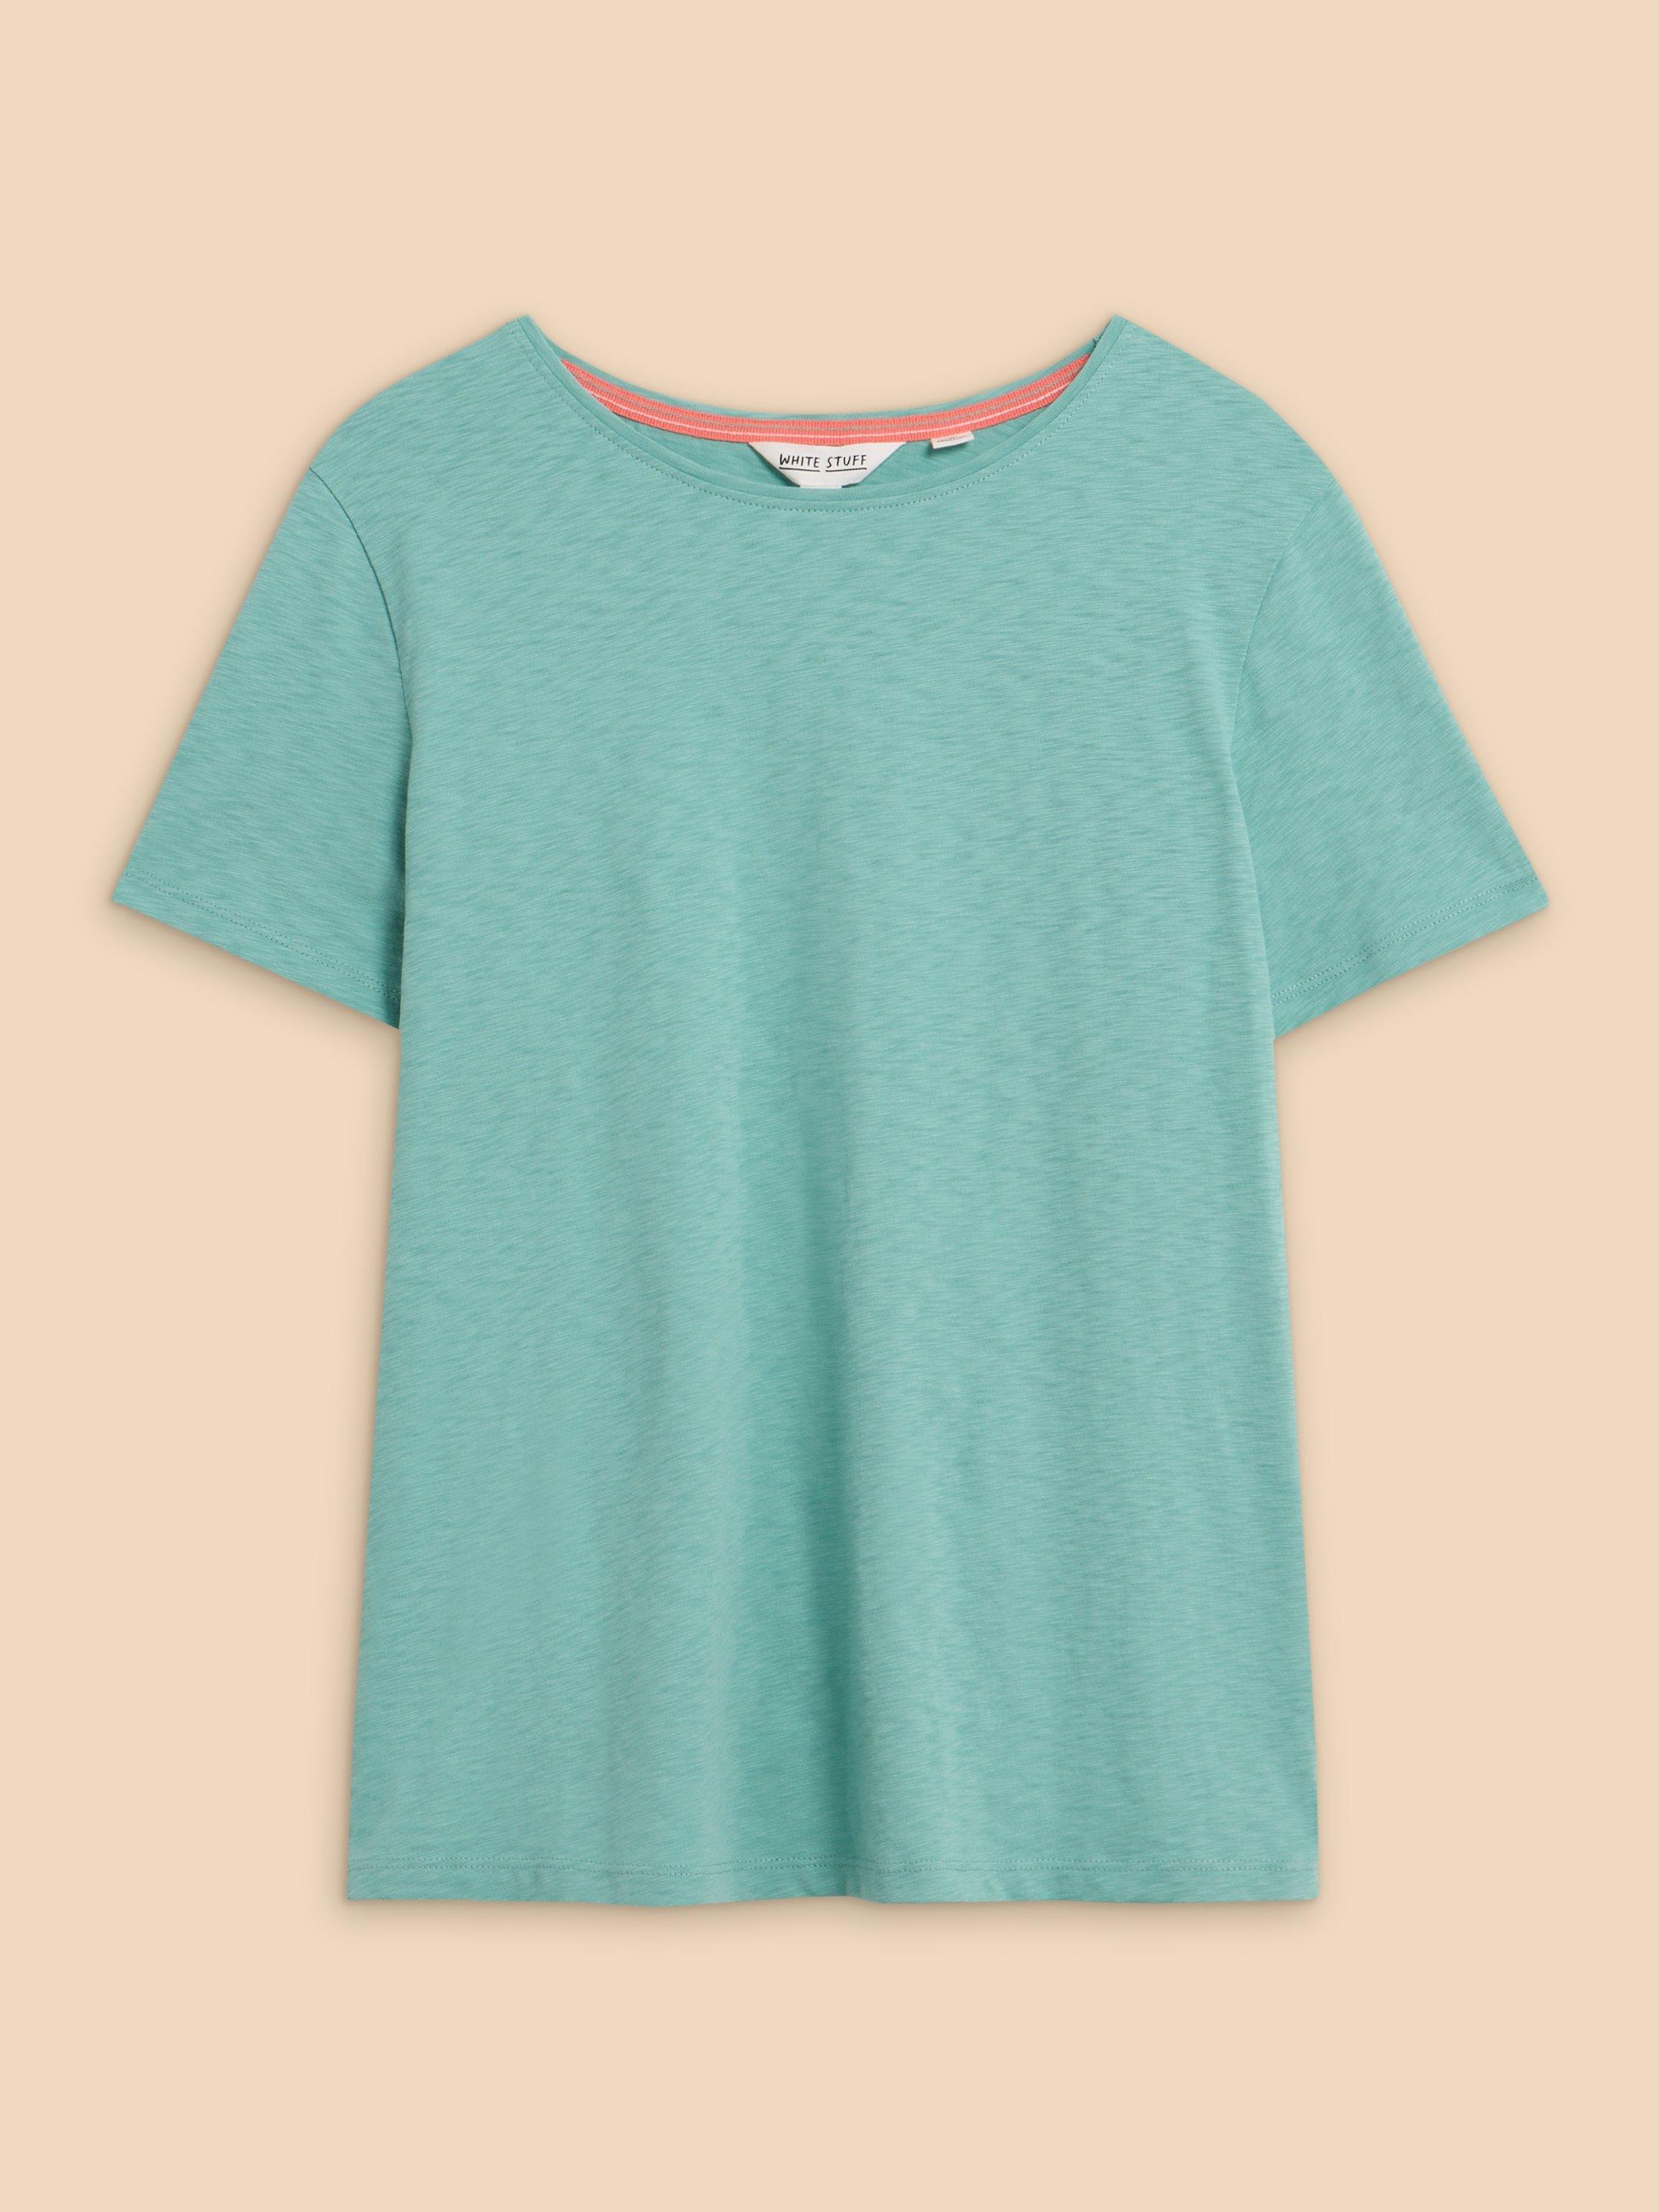 ABBIE TEE in MID TEAL - FLAT FRONT